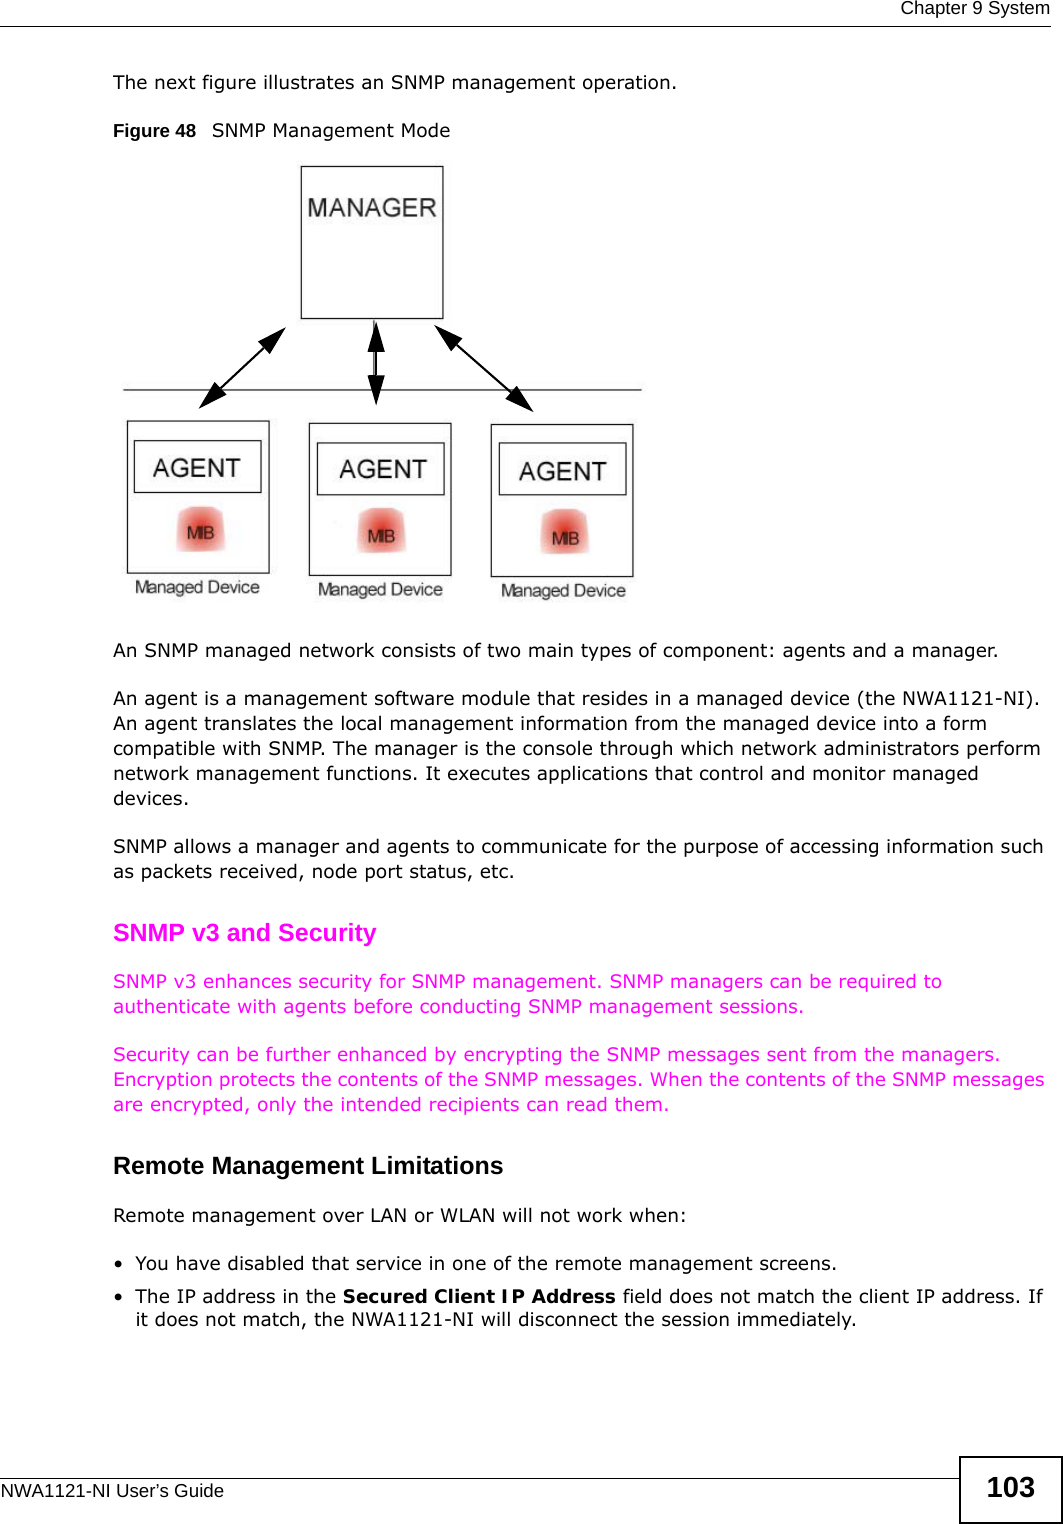  Chapter 9 SystemNWA1121-NI User’s Guide 103The next figure illustrates an SNMP management operation. Figure 48   SNMP Management ModeAn SNMP managed network consists of two main types of component: agents and a manager. An agent is a management software module that resides in a managed device (the NWA1121-NI). An agent translates the local management information from the managed device into a form compatible with SNMP. The manager is the console through which network administrators perform network management functions. It executes applications that control and monitor managed devices. SNMP allows a manager and agents to communicate for the purpose of accessing information such as packets received, node port status, etc.SNMP v3 and SecuritySNMP v3 enhances security for SNMP management. SNMP managers can be required to authenticate with agents before conducting SNMP management sessions.Security can be further enhanced by encrypting the SNMP messages sent from the managers. Encryption protects the contents of the SNMP messages. When the contents of the SNMP messages are encrypted, only the intended recipients can read them.Remote Management LimitationsRemote management over LAN or WLAN will not work when:• You have disabled that service in one of the remote management screens.• The IP address in the Secured Client IP Address field does not match the client IP address. If it does not match, the NWA1121-NI will disconnect the session immediately.